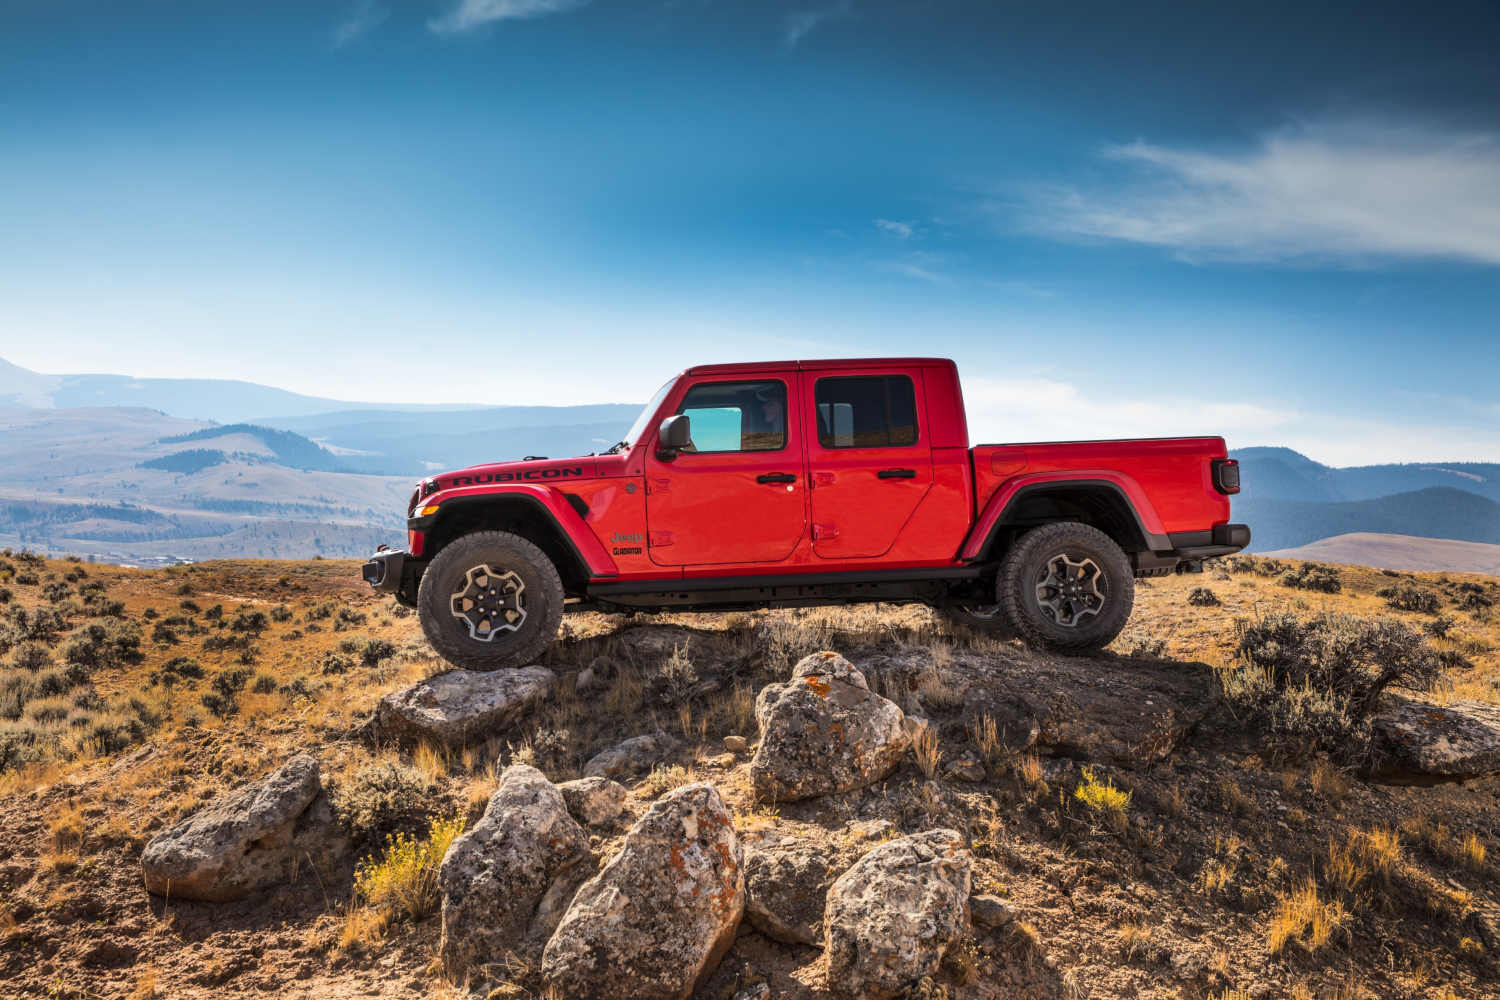 This Jeep Gladiator is a reliable pickup truck